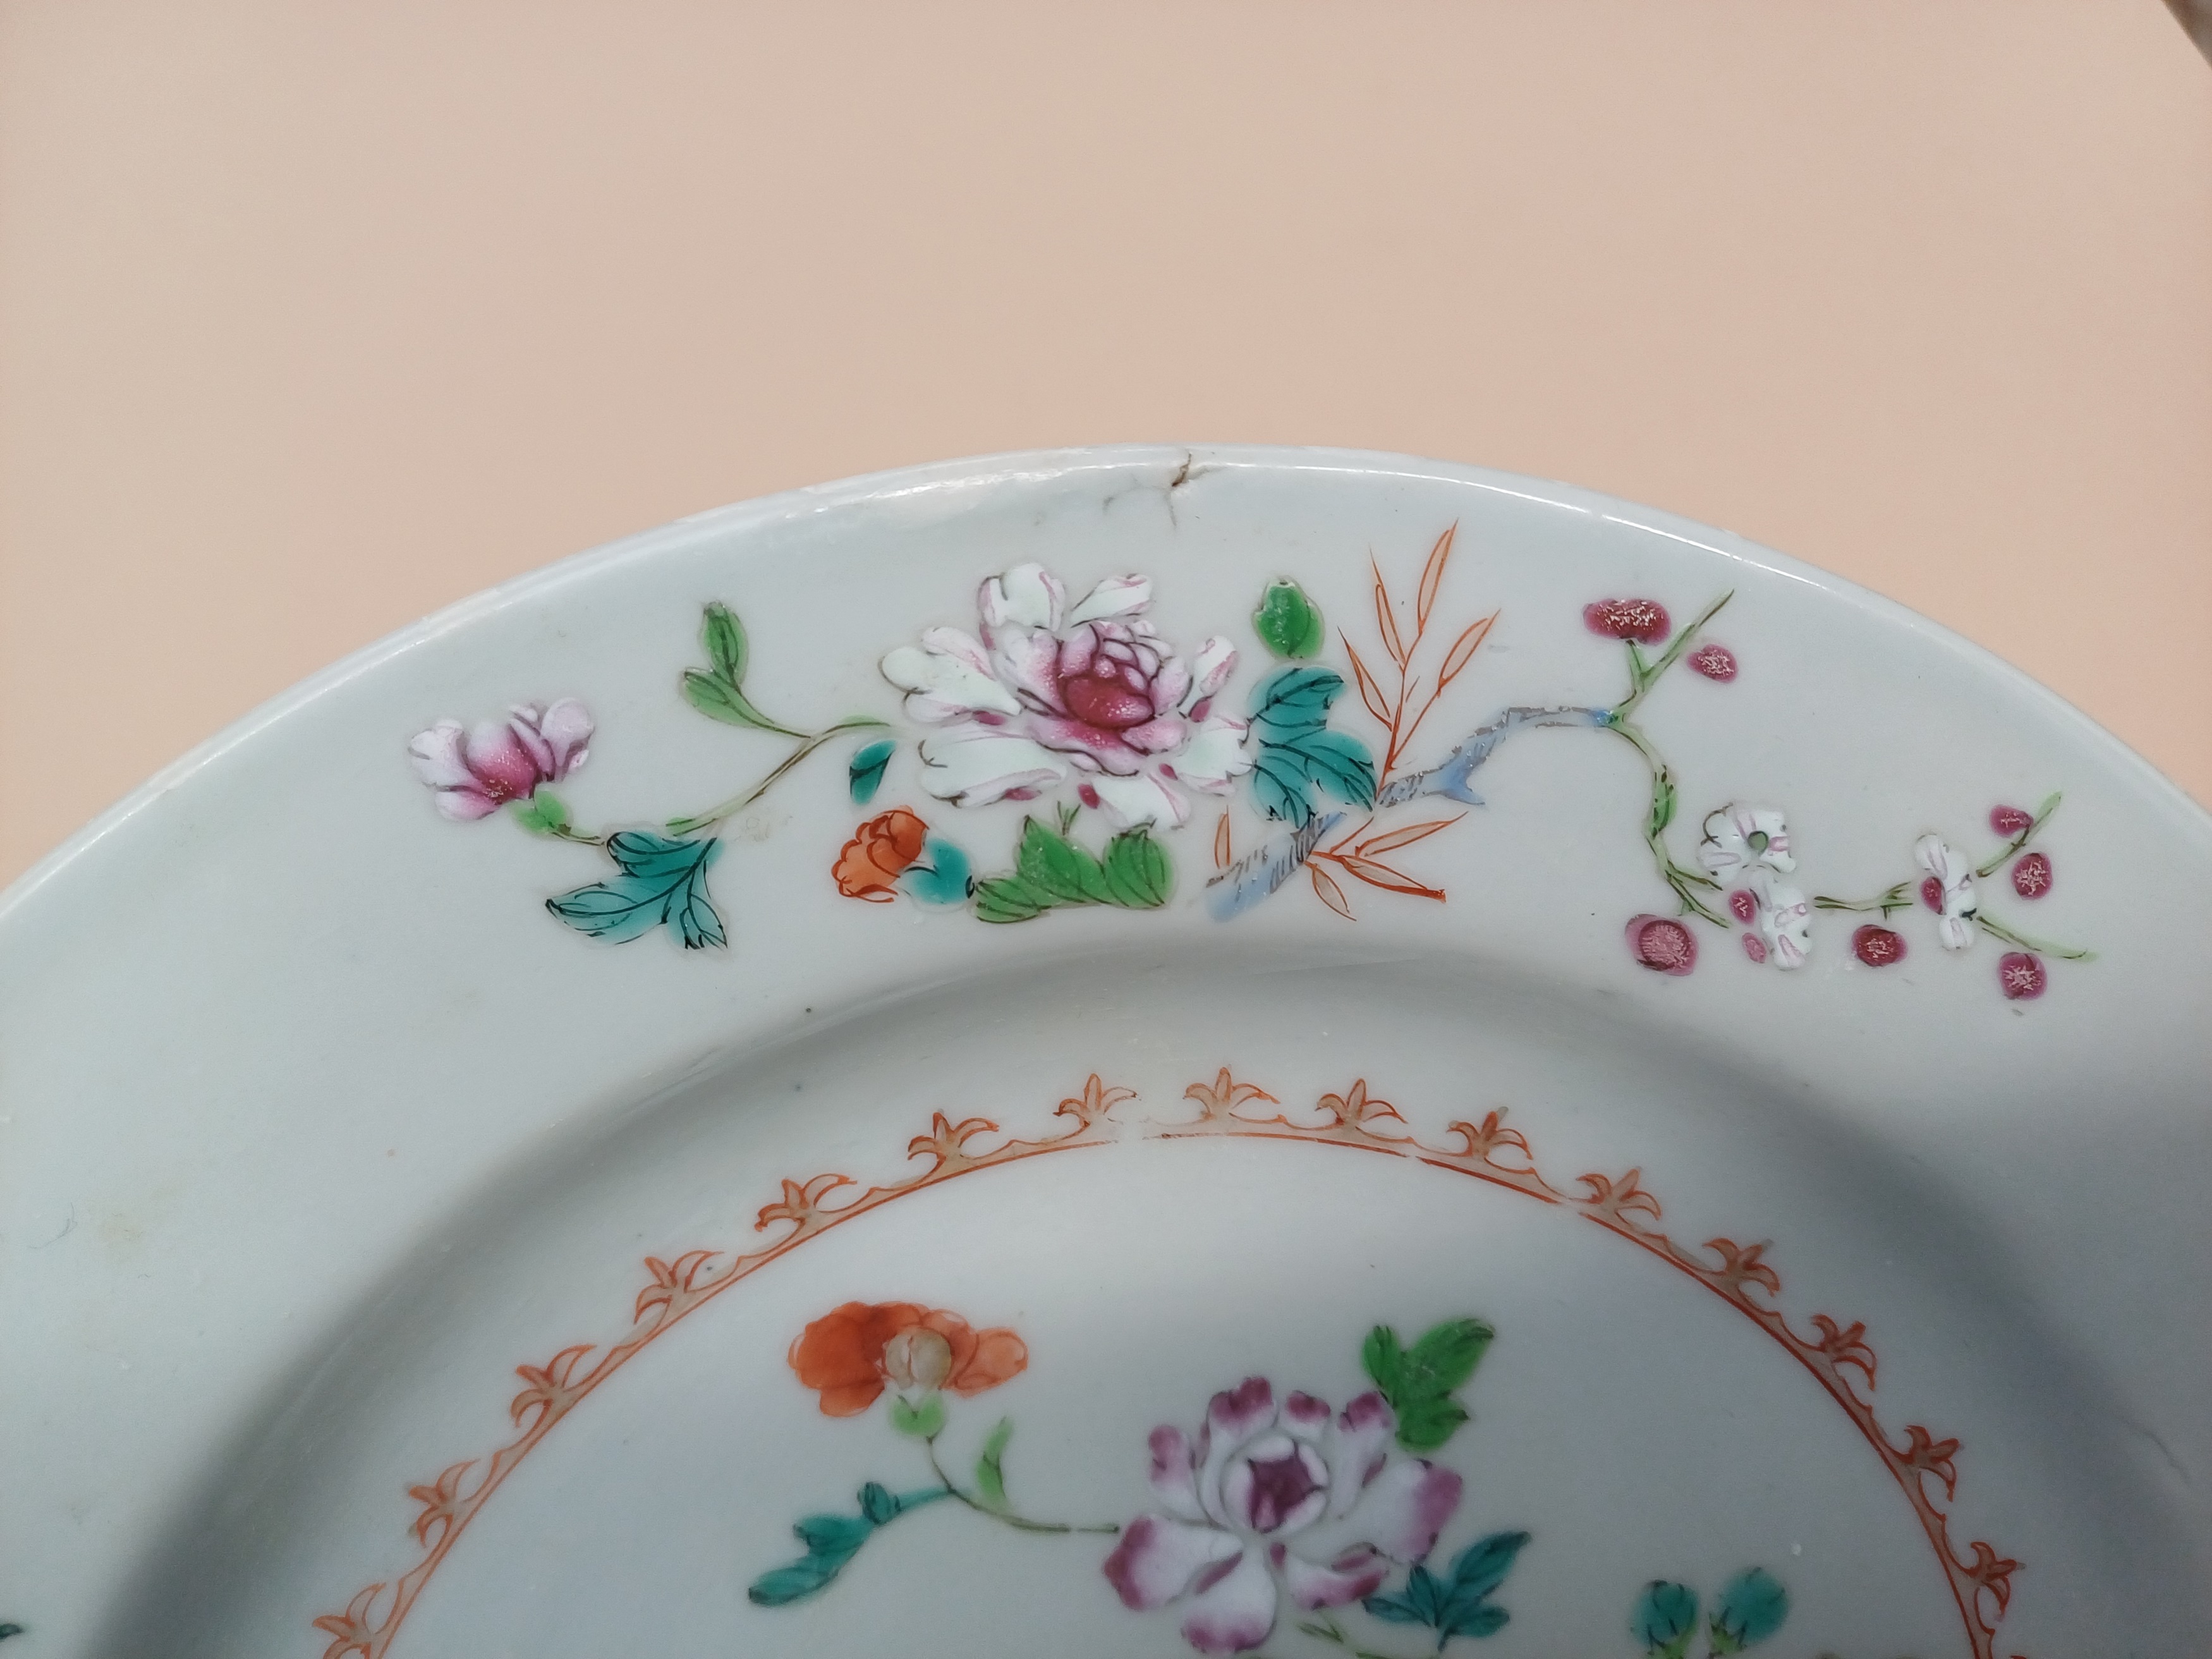 TWO CHINESE EXPORT FAMILLE-ROSE 'CRANES AND BLOSSOMS' DISHES 清十八世紀 外銷粉彩牡丹鶴紋盤兩件 - Image 7 of 15